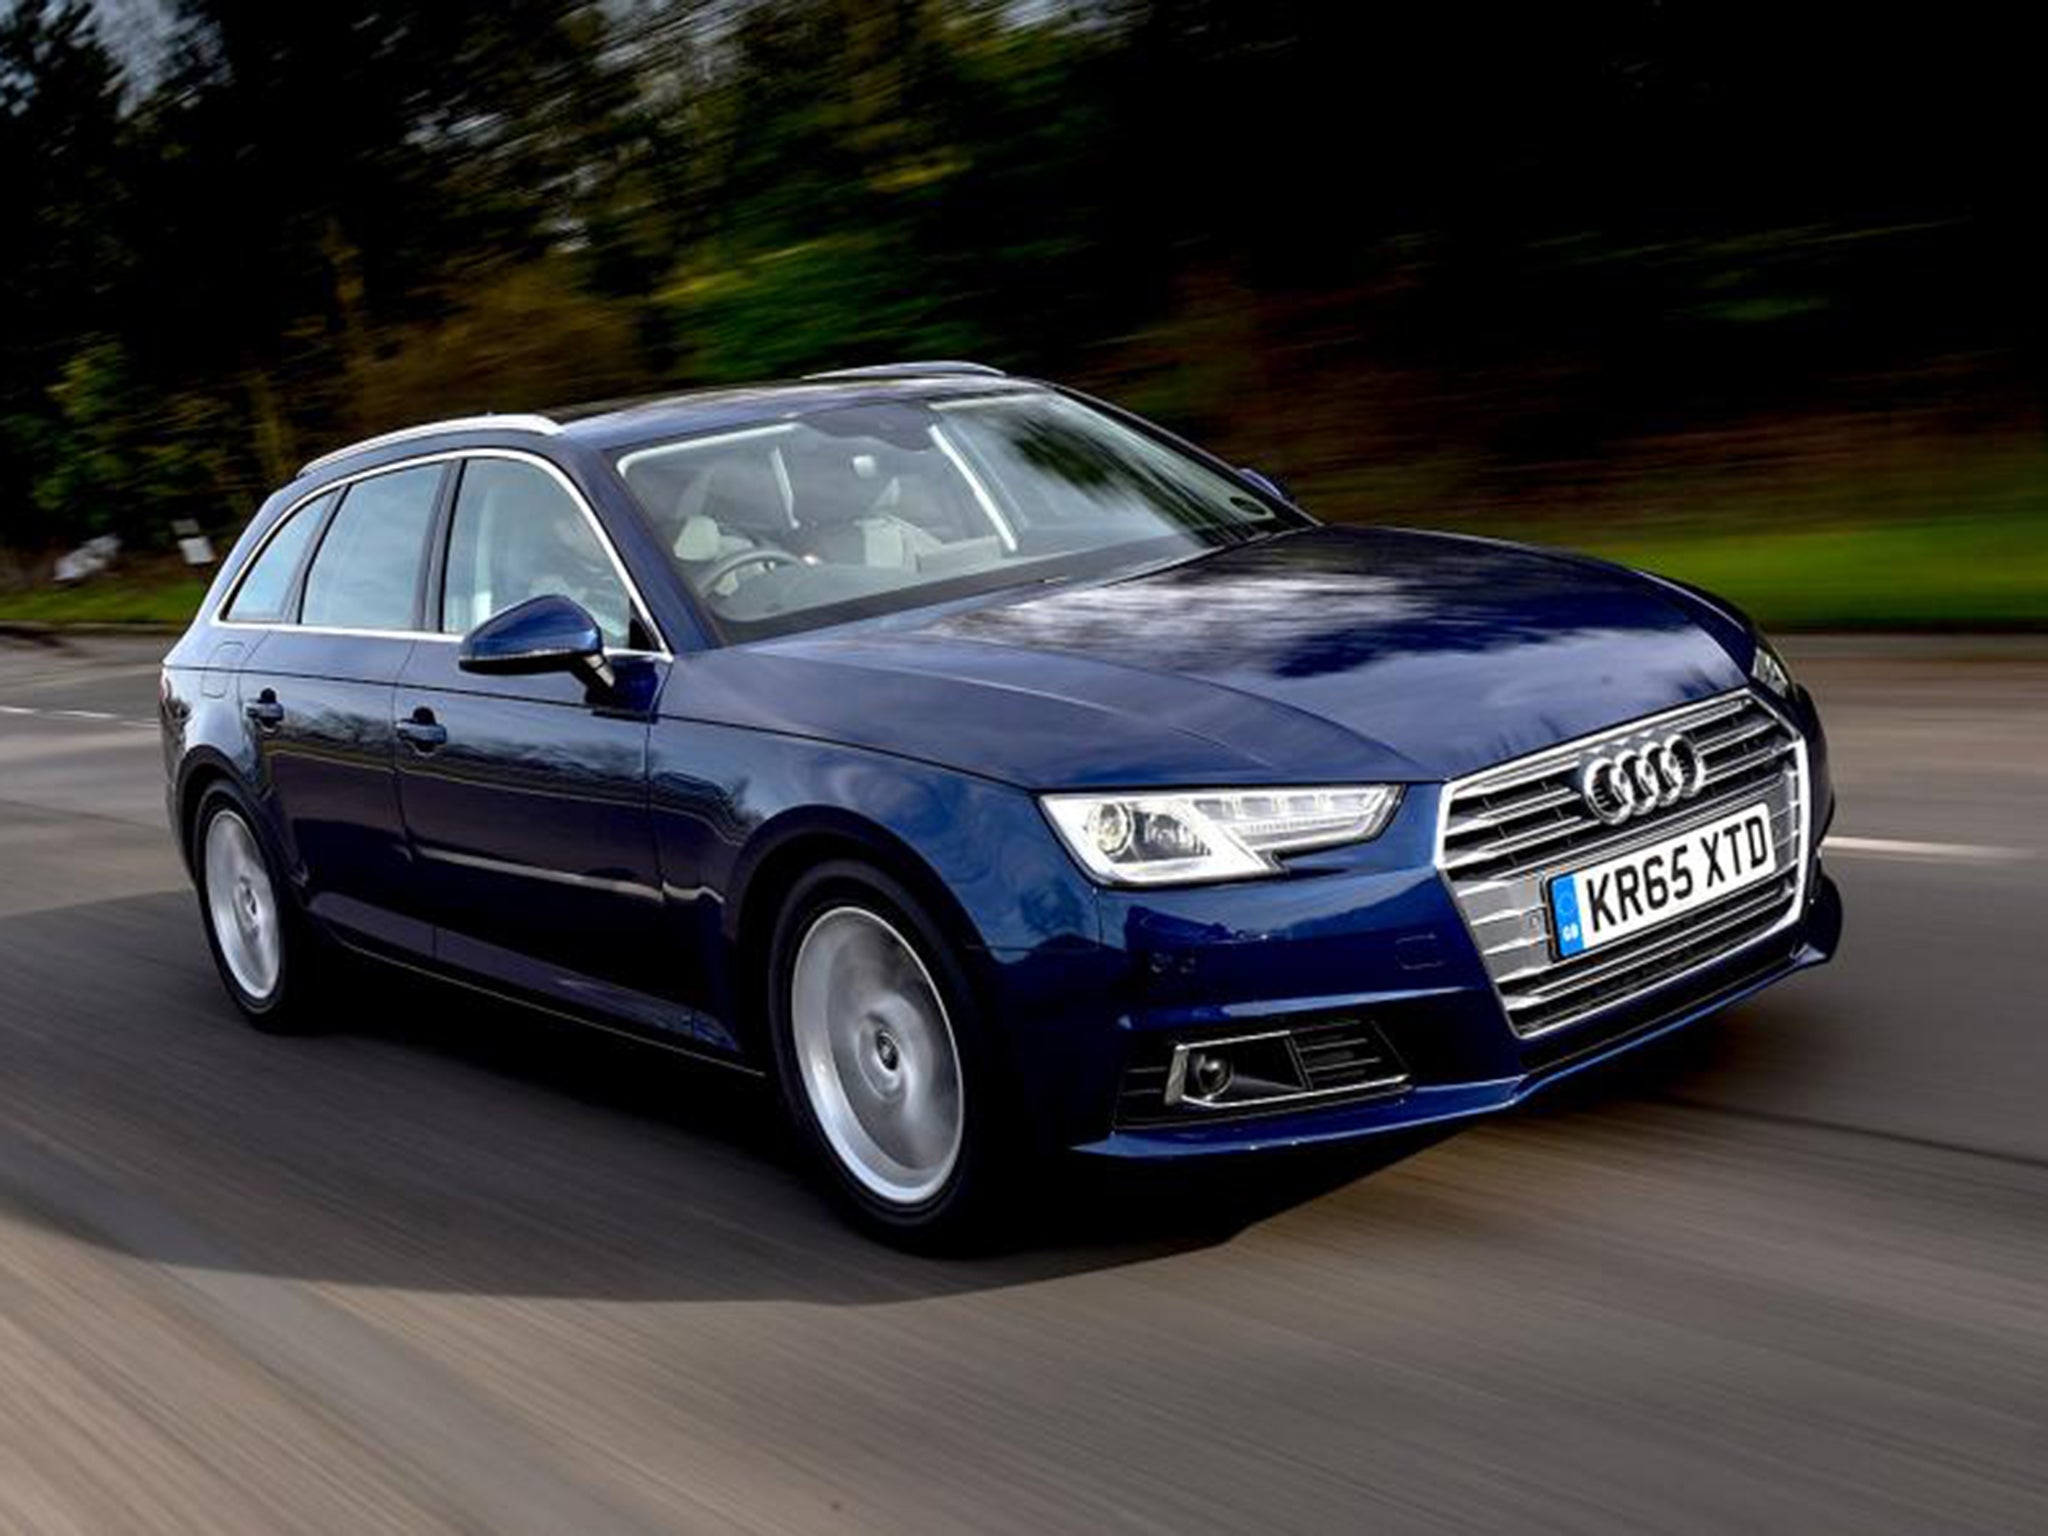 Audi A4 Avant 2.0 TDI 150 Ultra Sport, car review: Offering economy and style ...